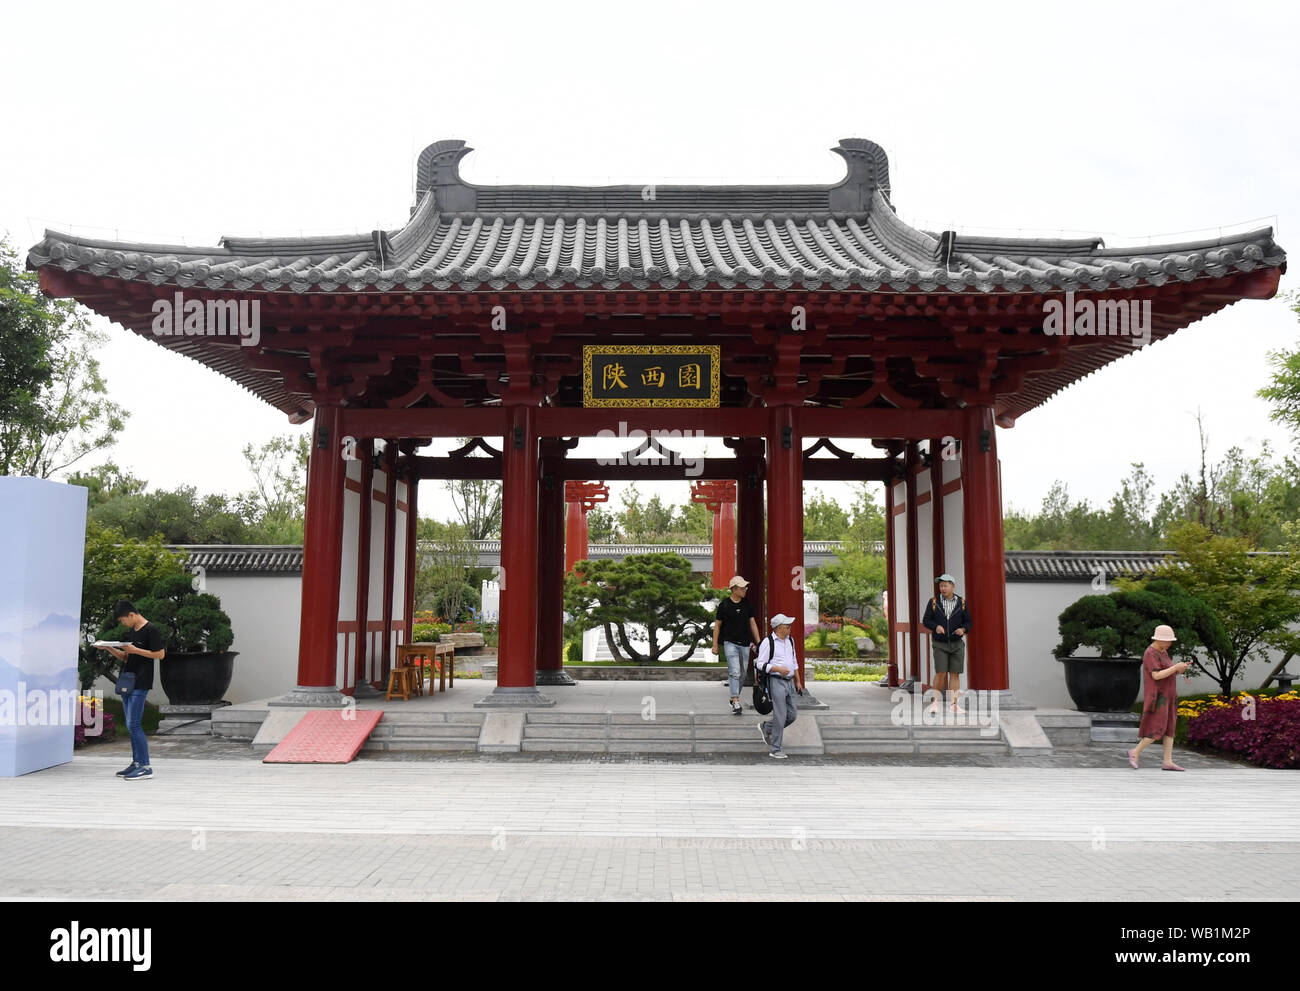 (190823) -- BEIJING, Aug. 23, 2019 (Xinhua) -- Visitors are seen at the Shaanxi Garden at the Beijing International Horticultural Exhibition in Beijing, capital of China, Aug. 22, 2019. As a land-locked province, Shaanxi stretches the drainage areas of the Yangtze River and the Yellow River, the two longest rivers in China. It boasts main parts of the Qinling Mountains, one of the biodiversity hotspots worldwide, dividing northern temperate zones from subtropical zones. Meanwhile, Shaanxi is habitat of rare protected animals.   Over the past years, Shaanxi Province has been promoting ecologica Stock Photo